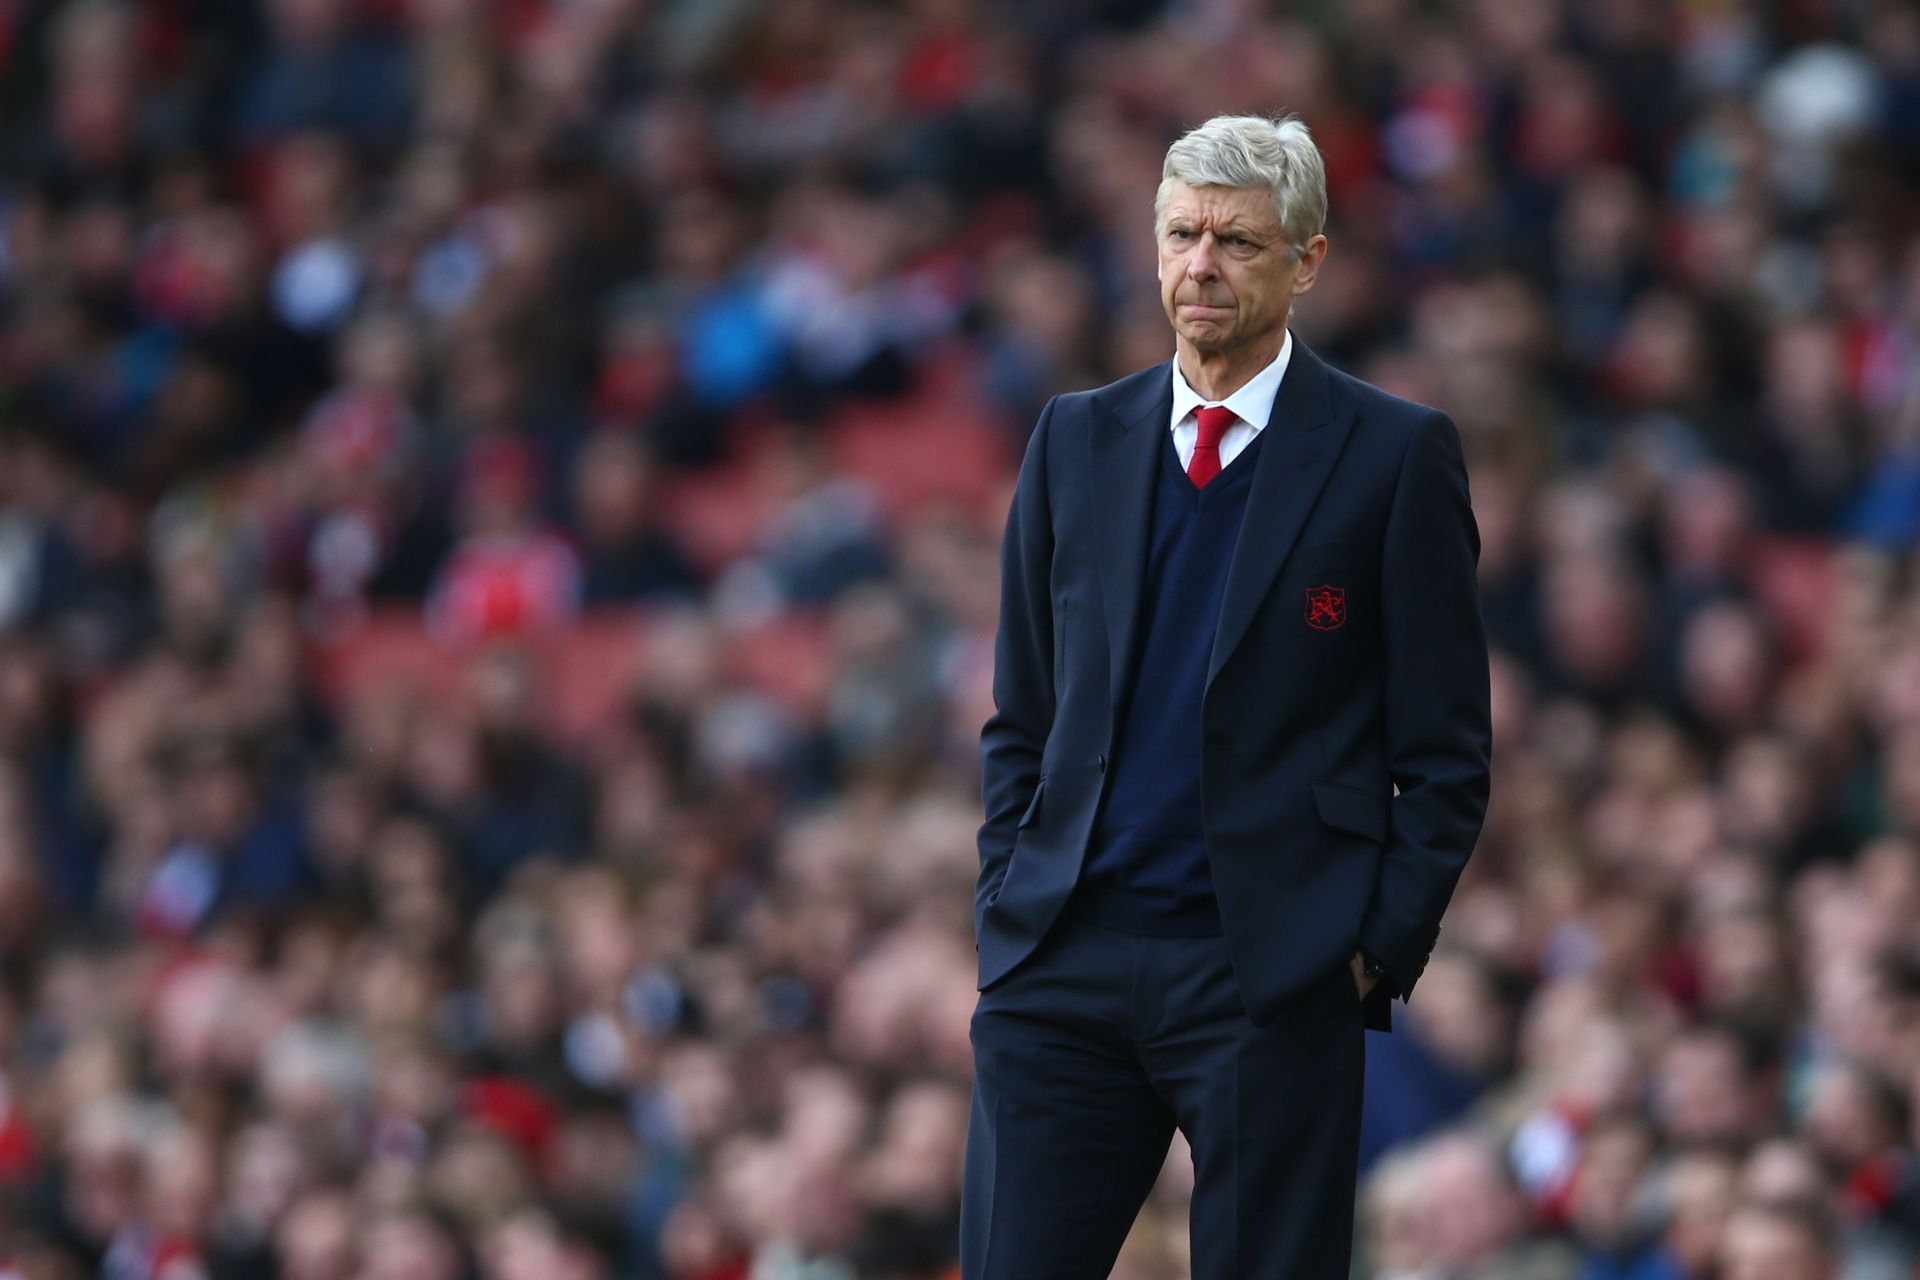 Arsene Wenger deserved more recognition from the Arsenal fans